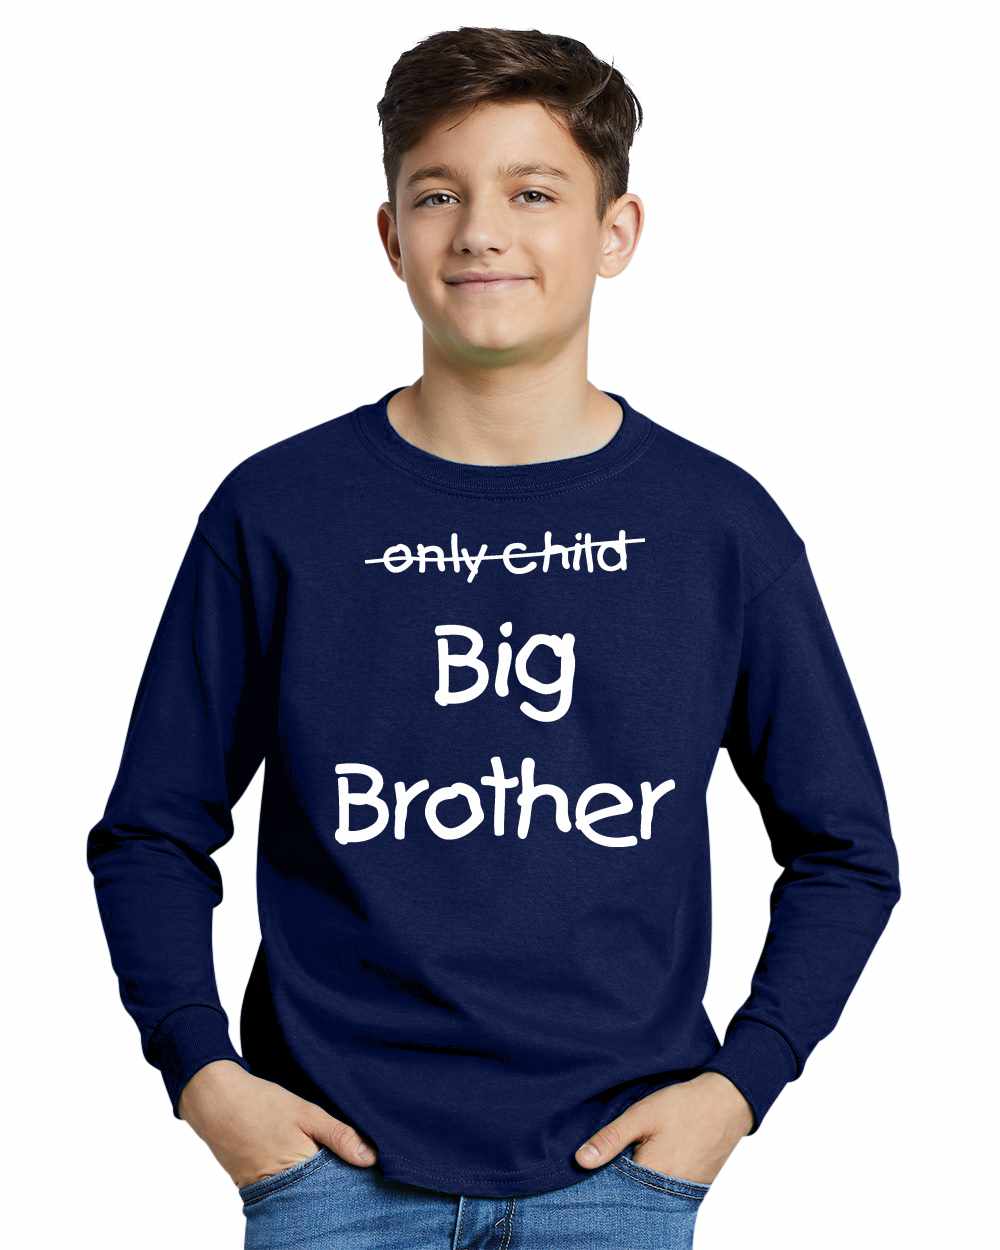 Only Child BIG BROTHER on Youth Long Sleeve Shirt (#965-203)